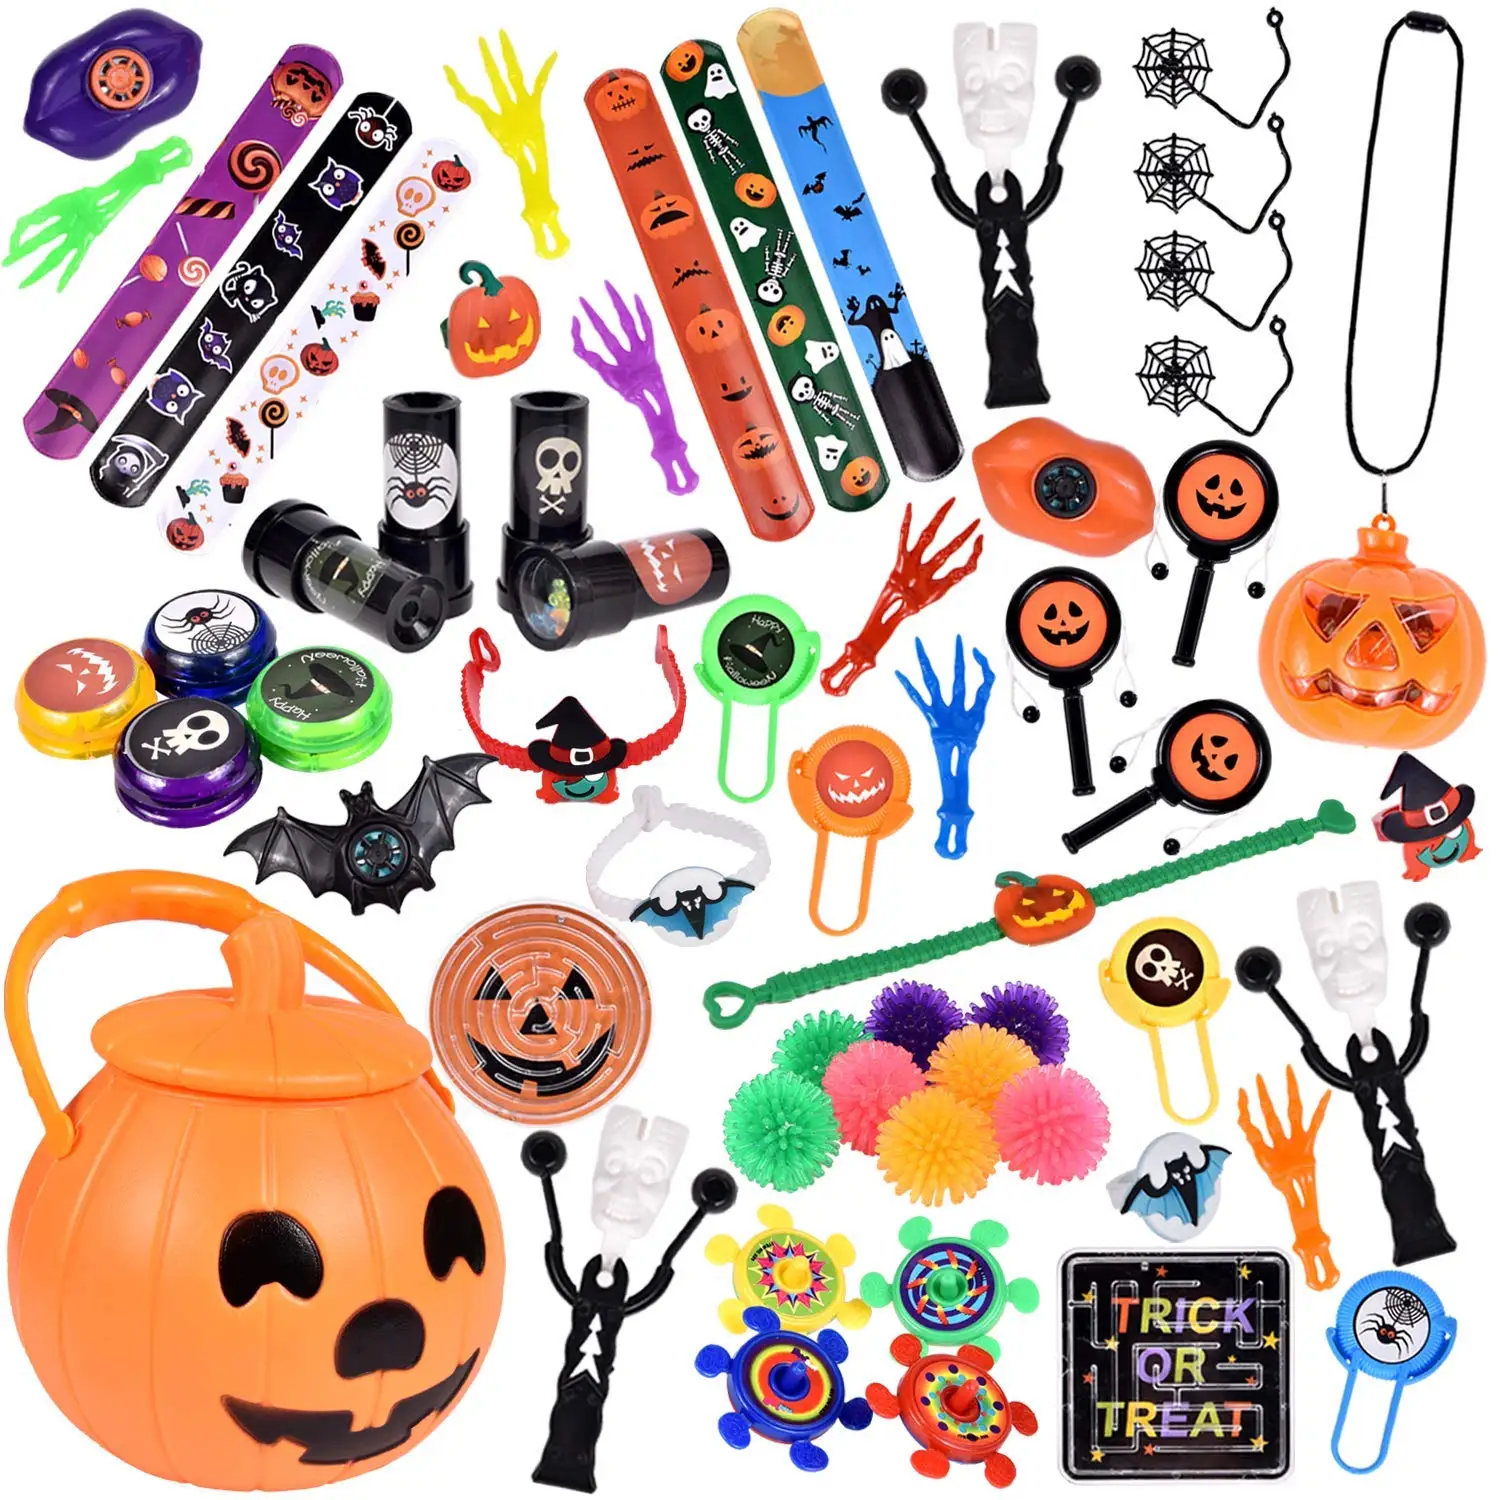 Halloween Party Supplies Trick or Tread Gifts//Goodie Bag Stuffers Silicone Wristbands 24PCS Halloween Party Favors Rubber Bracelets